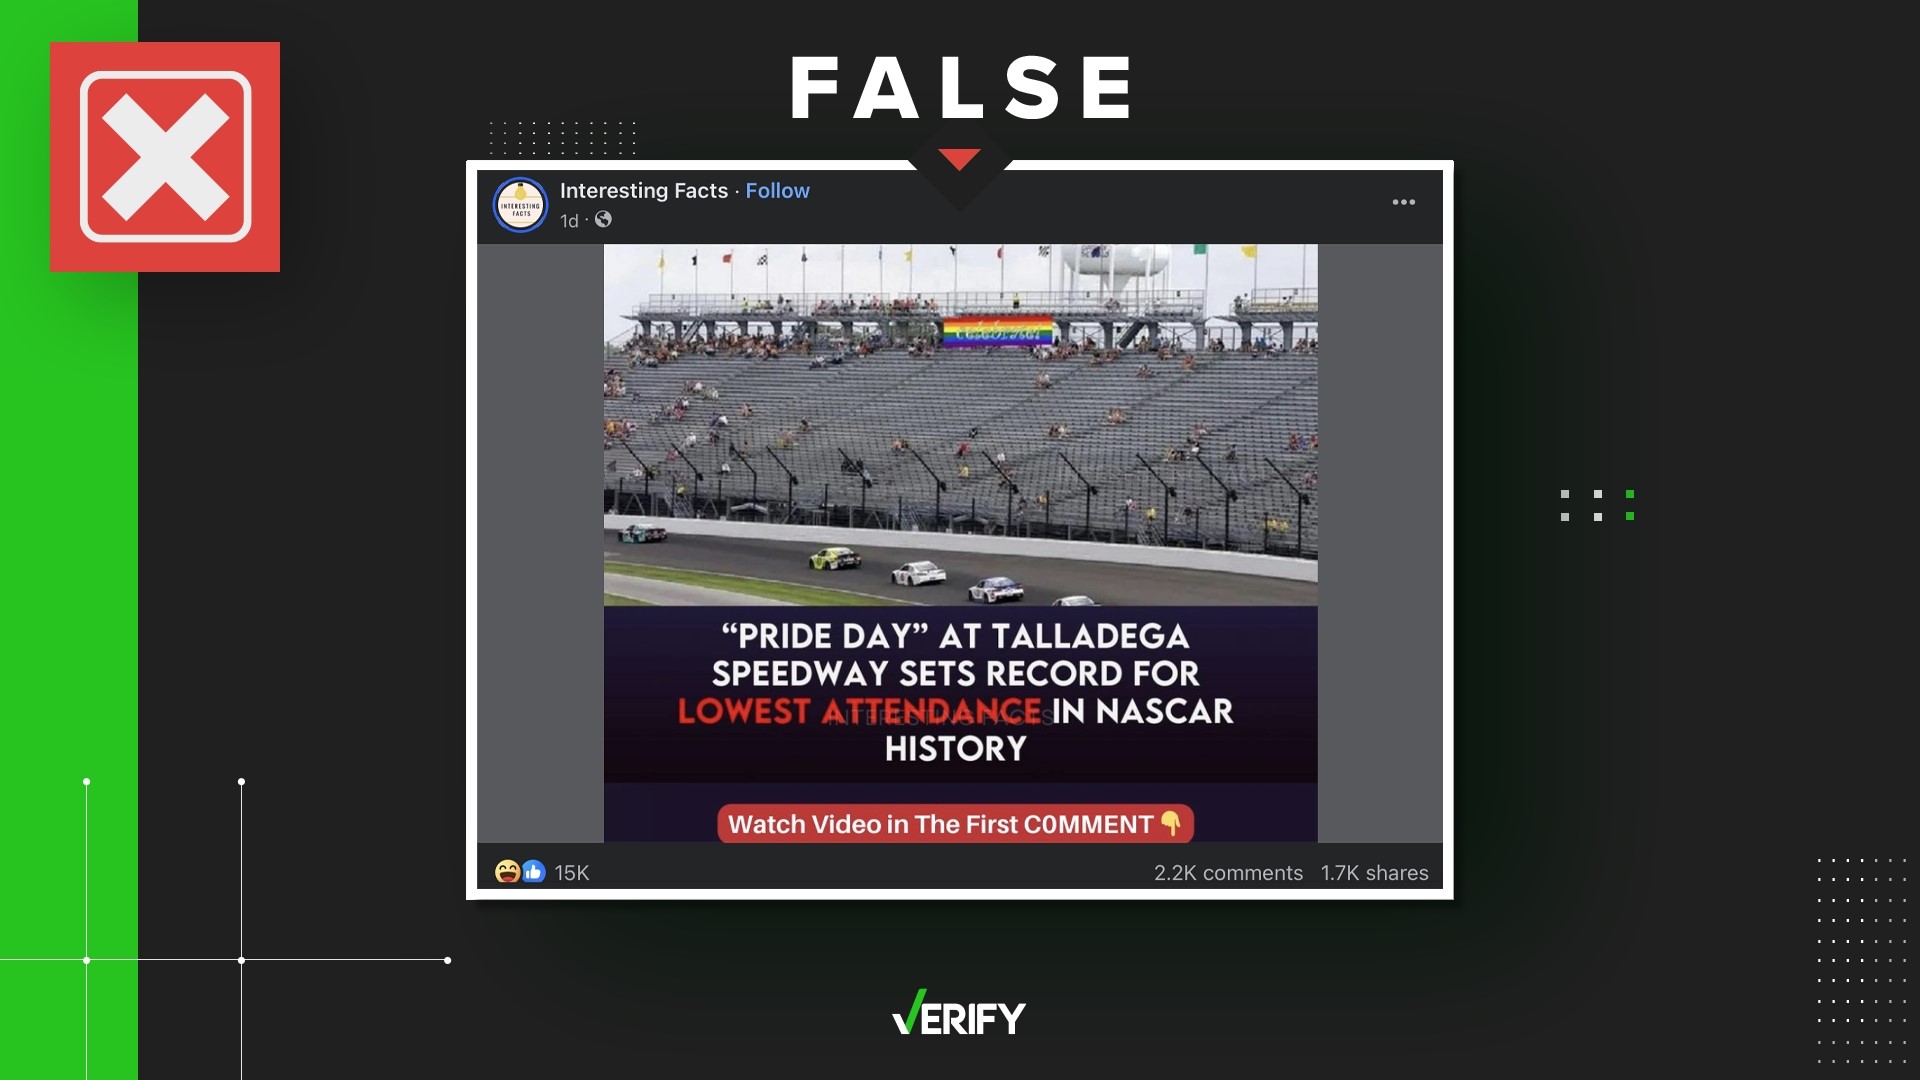 A satirical blog wrote about a poorly-attended Pride Day event at the NASCAR venue. While it never happened, the story's gotten serious attention on social media.